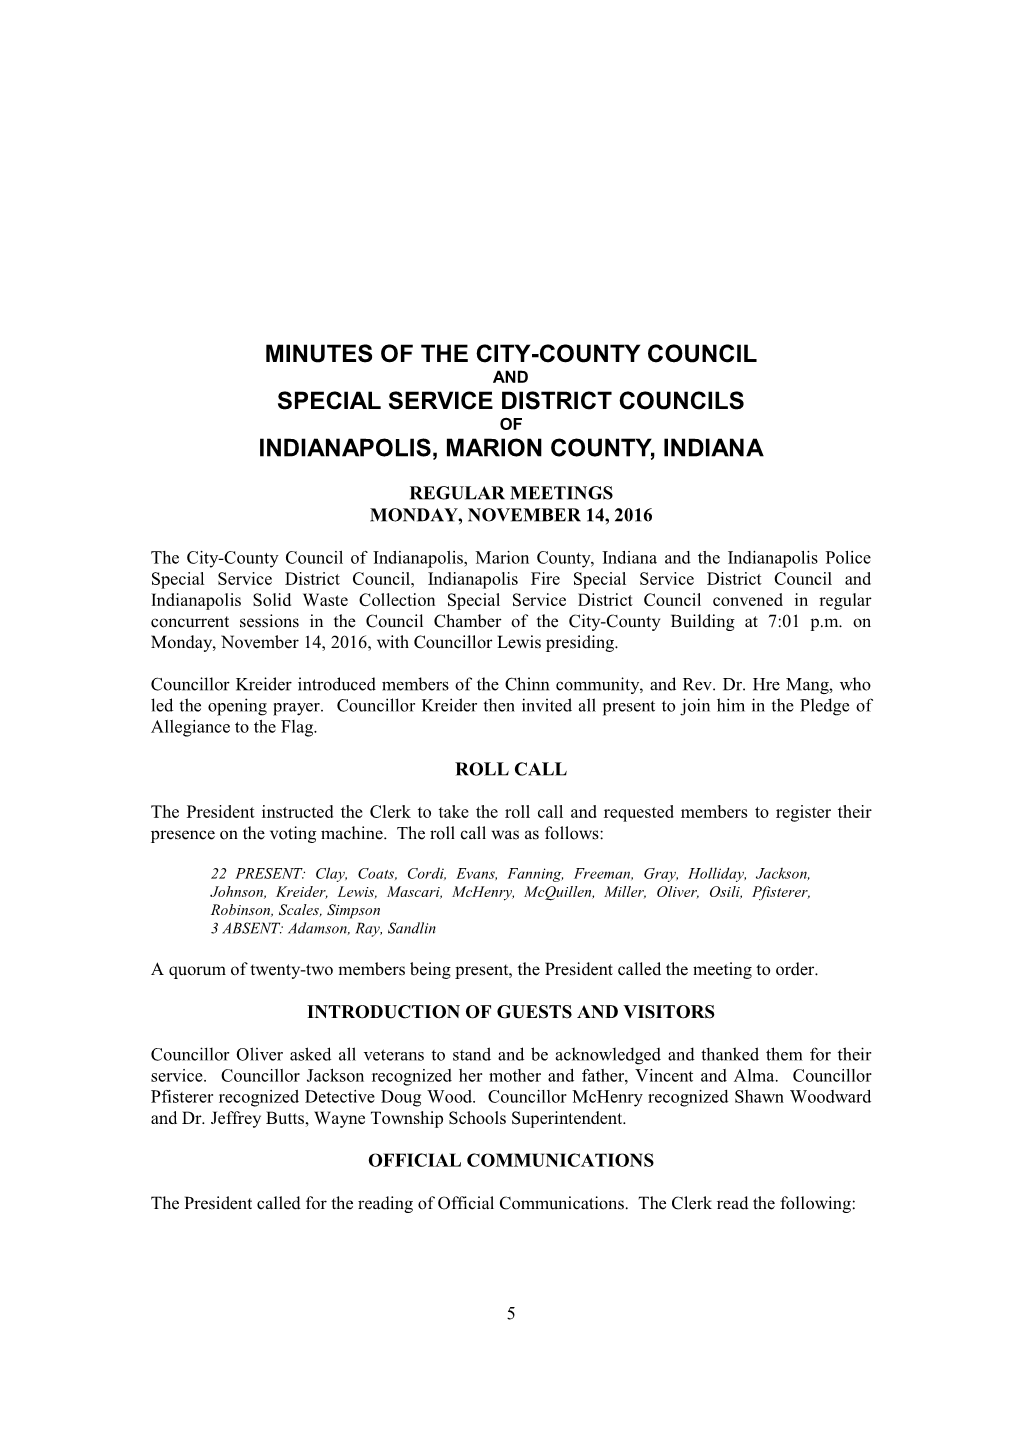 Minutes of the City-County Council Special Service